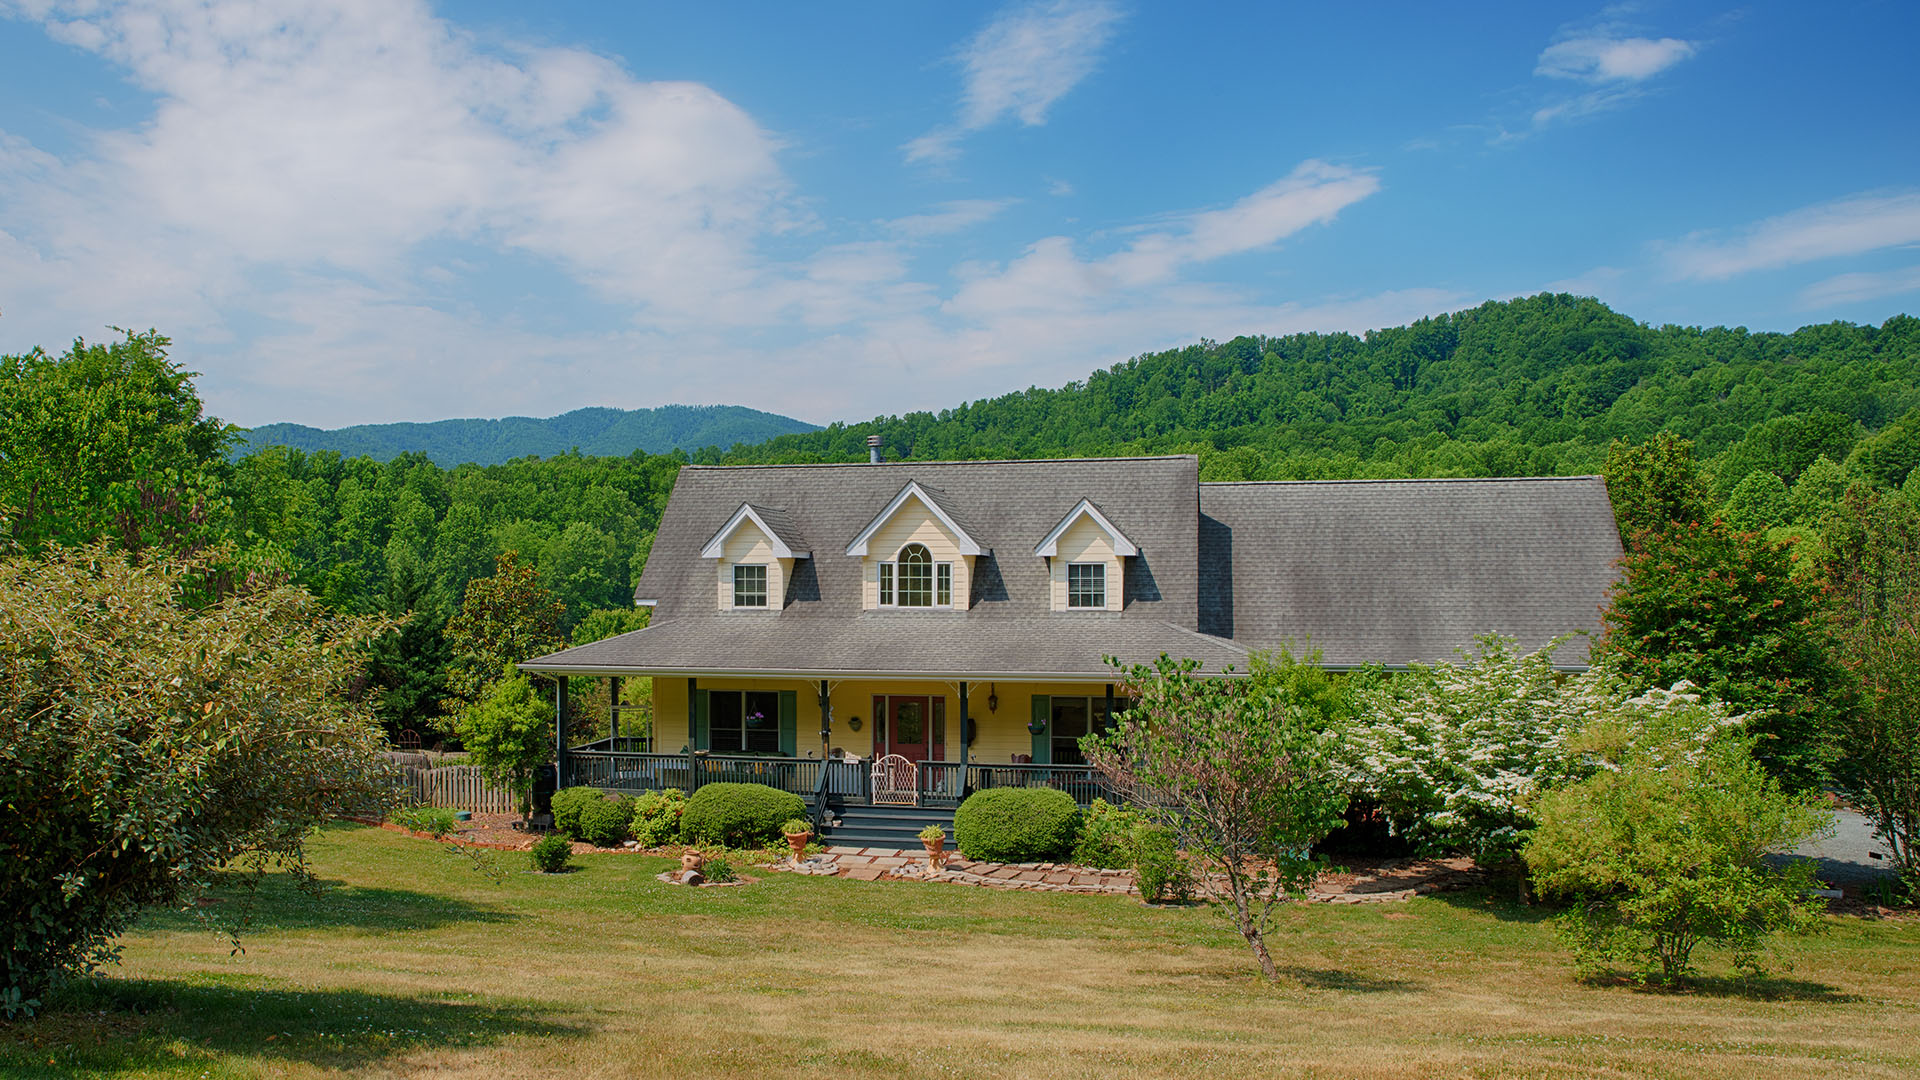 17 Lakeland Lane in Nelson County, Virginia for sale